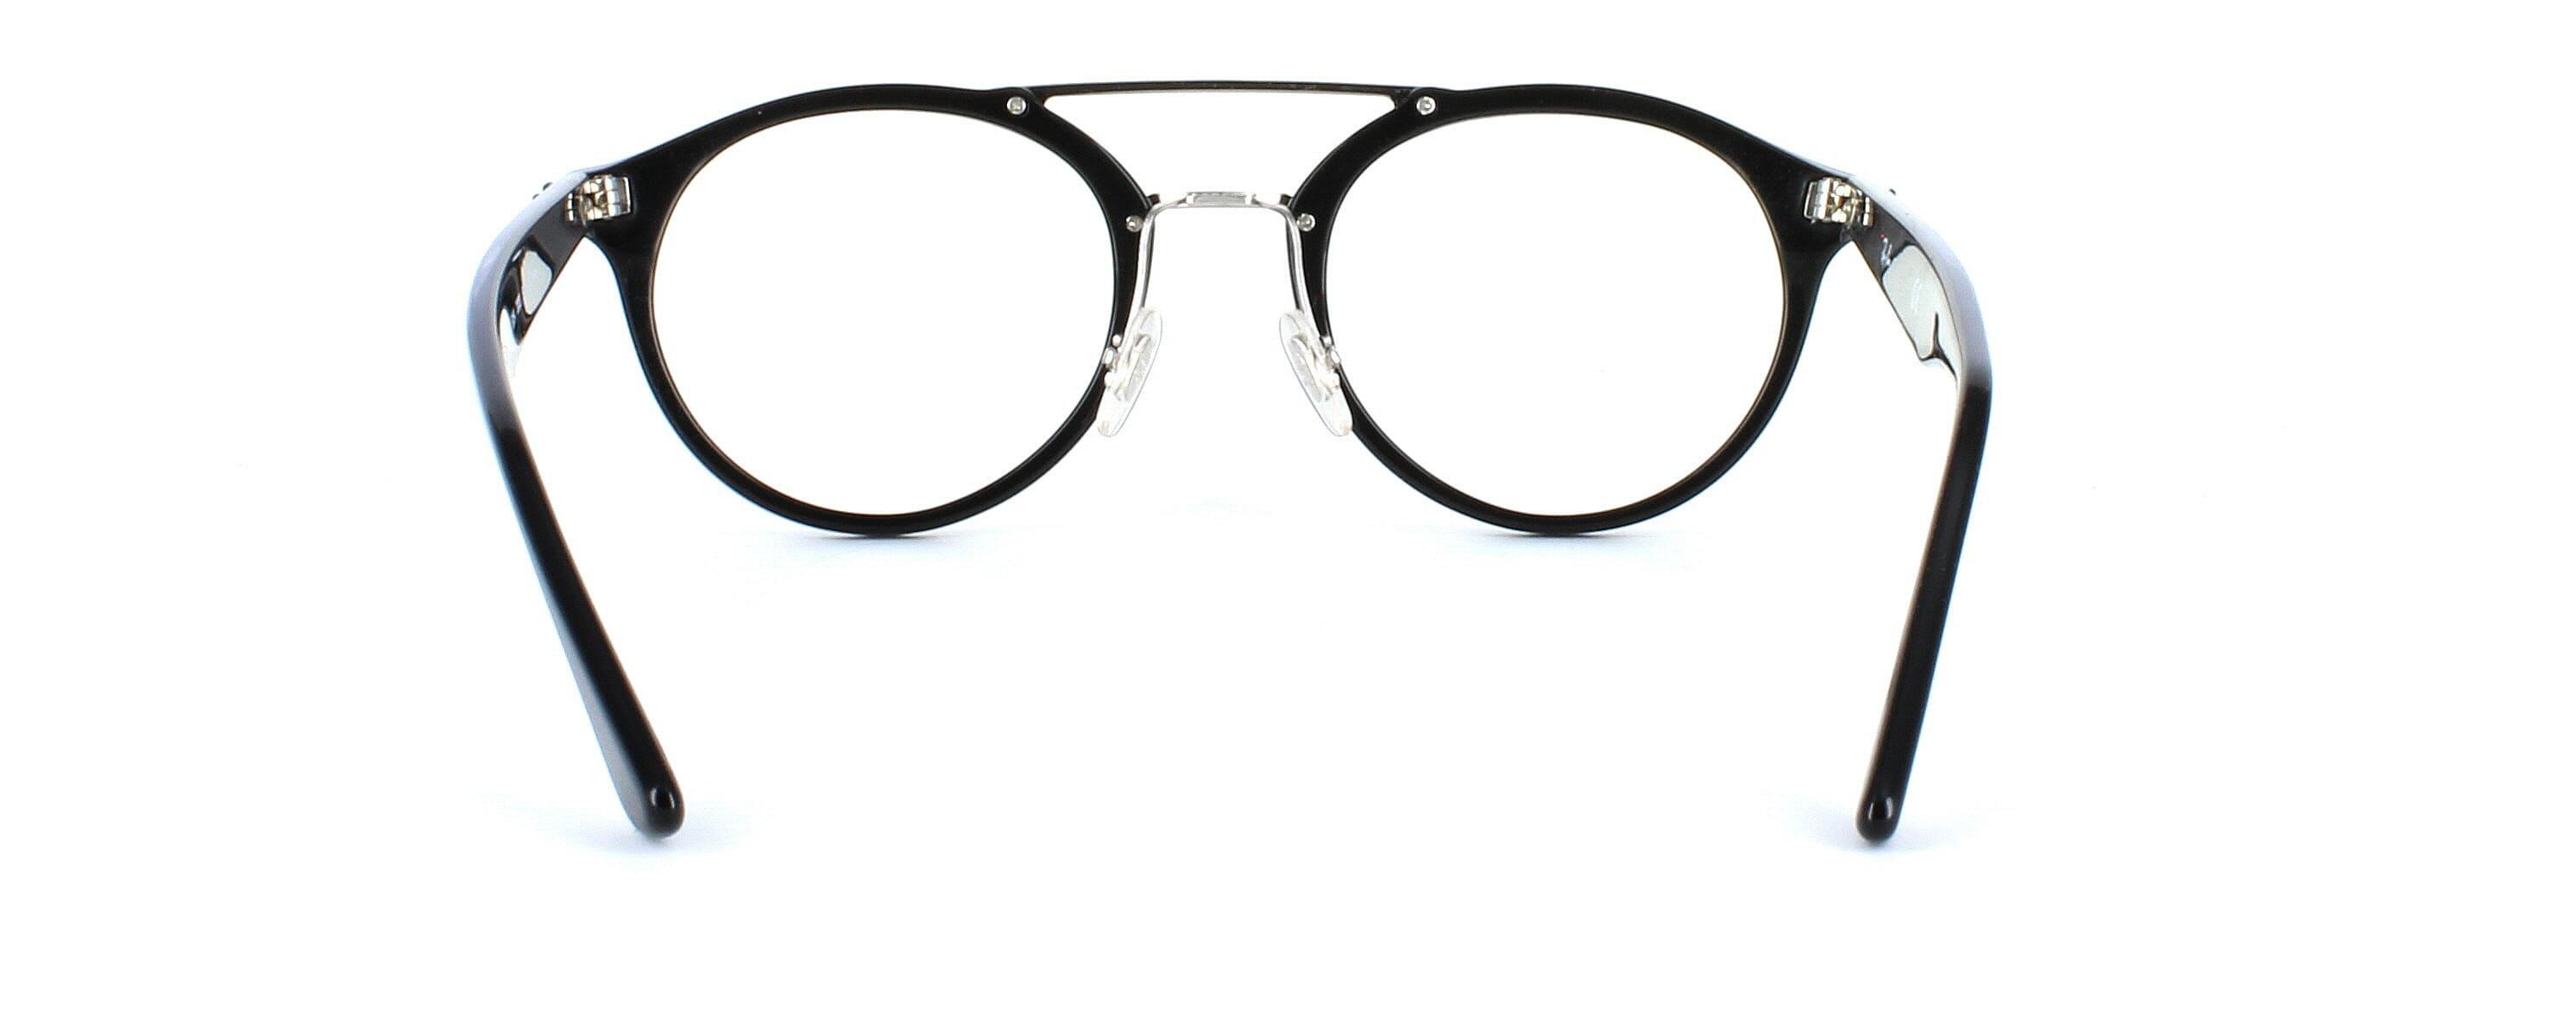 Ray Ban 5347 - Ladies acetate & metal combination frame. Black face & arms with double metal nose bridge in silver - image view 4